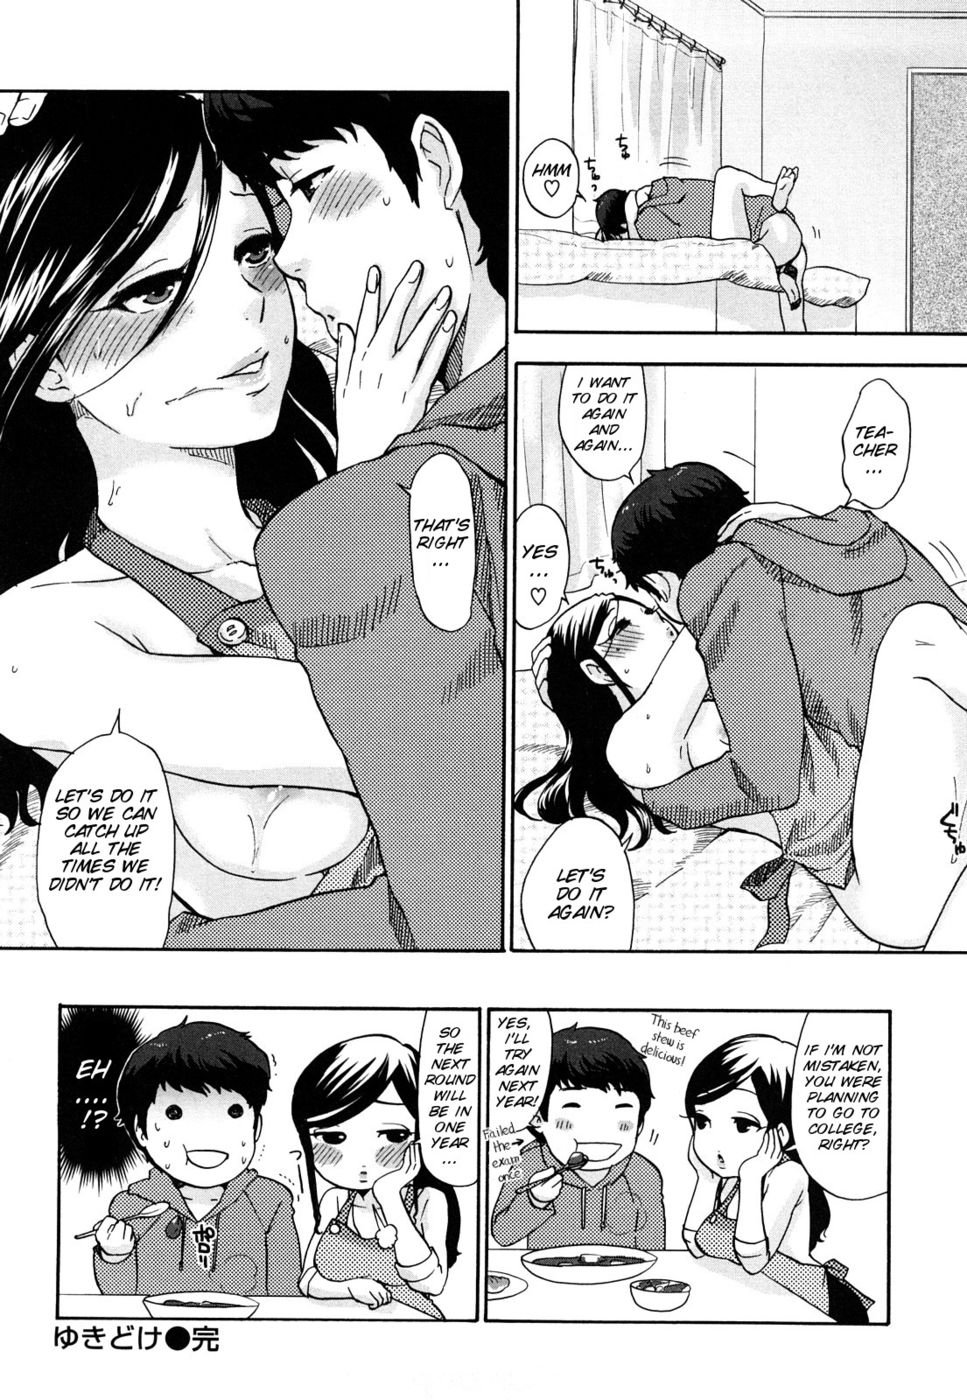 Hentai Manga Comic-How About A Cold-blooded Female Teacher ?-Read-28